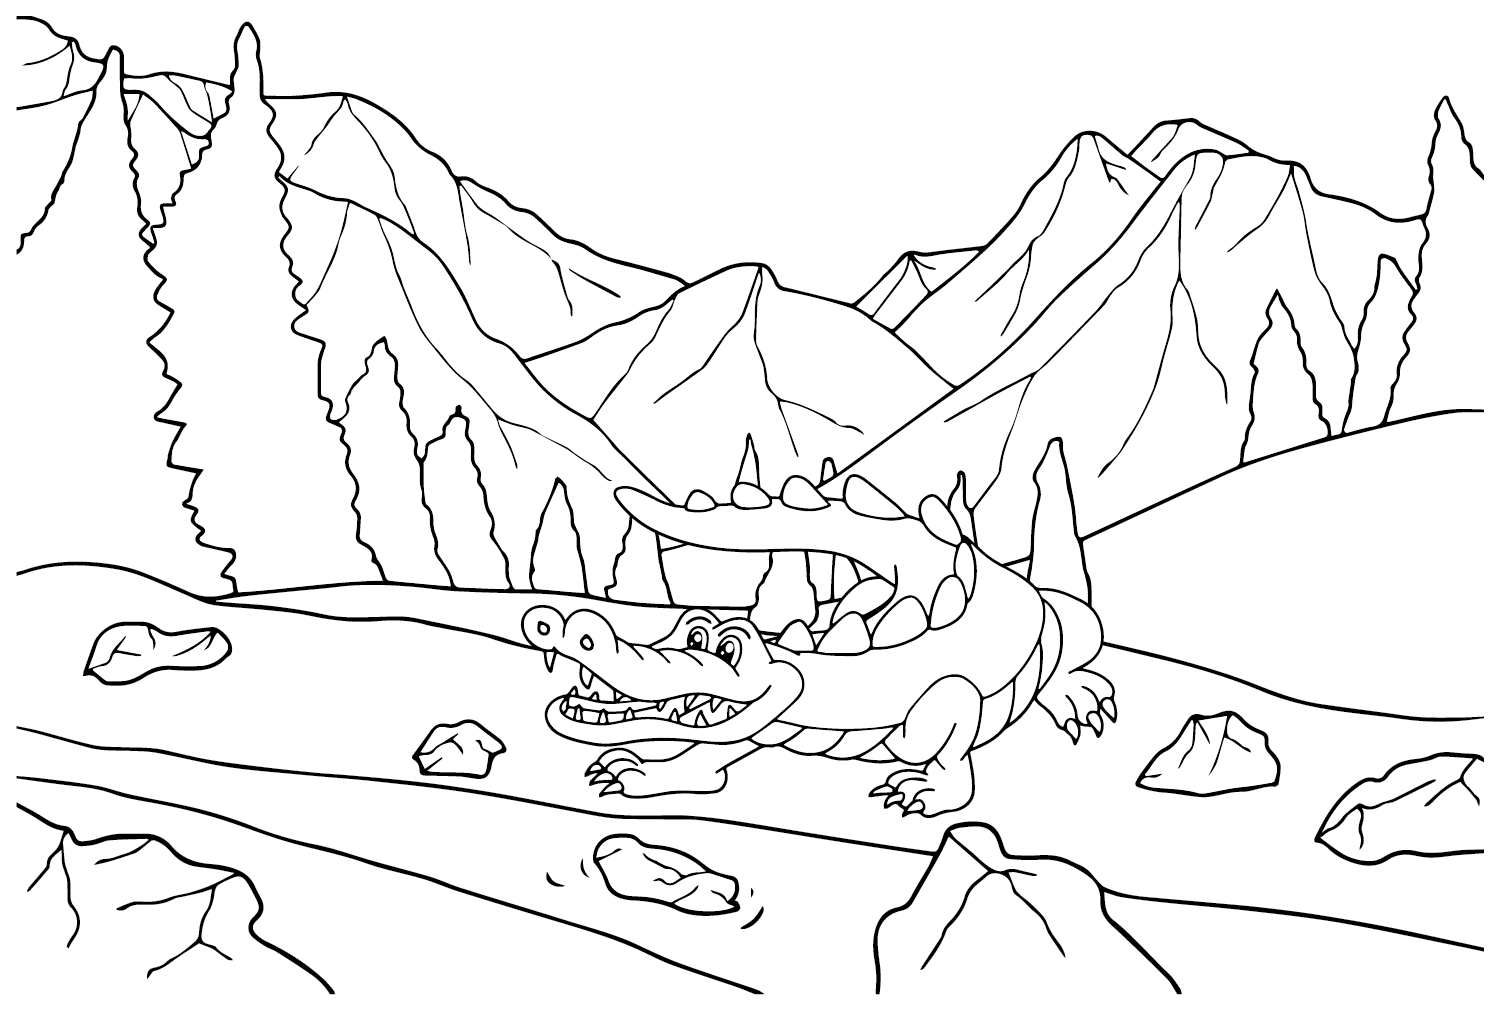 Crocodile Coloring Pages to Download